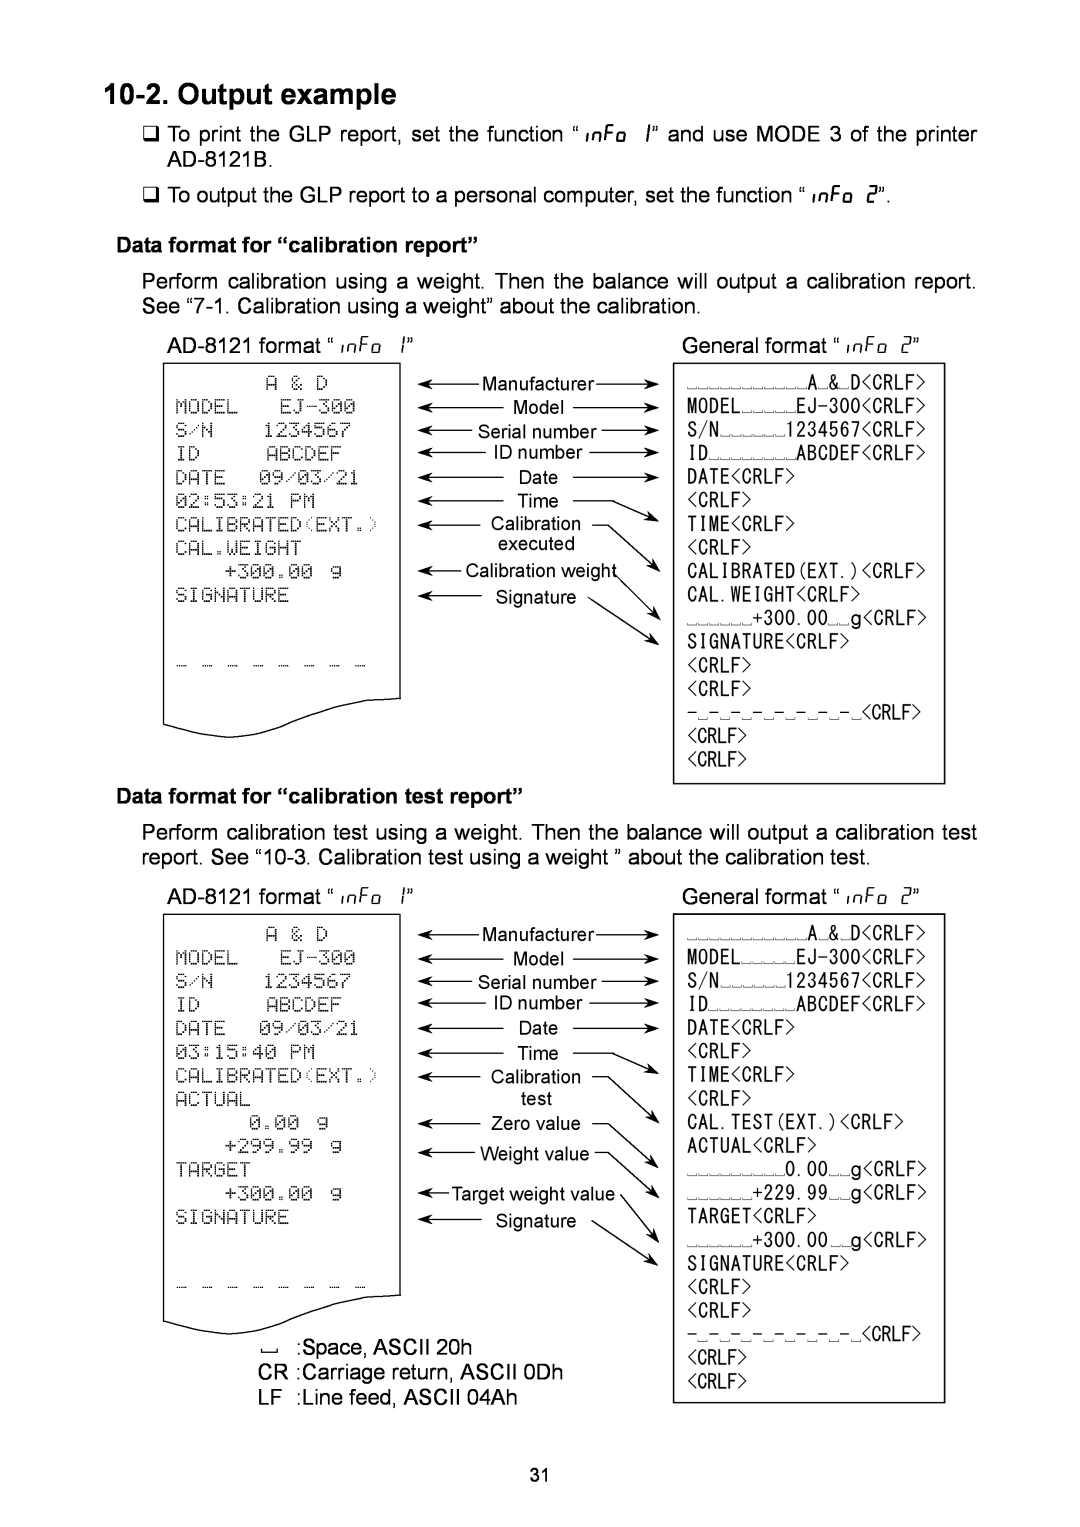 A&D EJ-300, EJ-6100, EJ-440 Output example, Data format for “calibration report”, Data format for “calibration test report” 